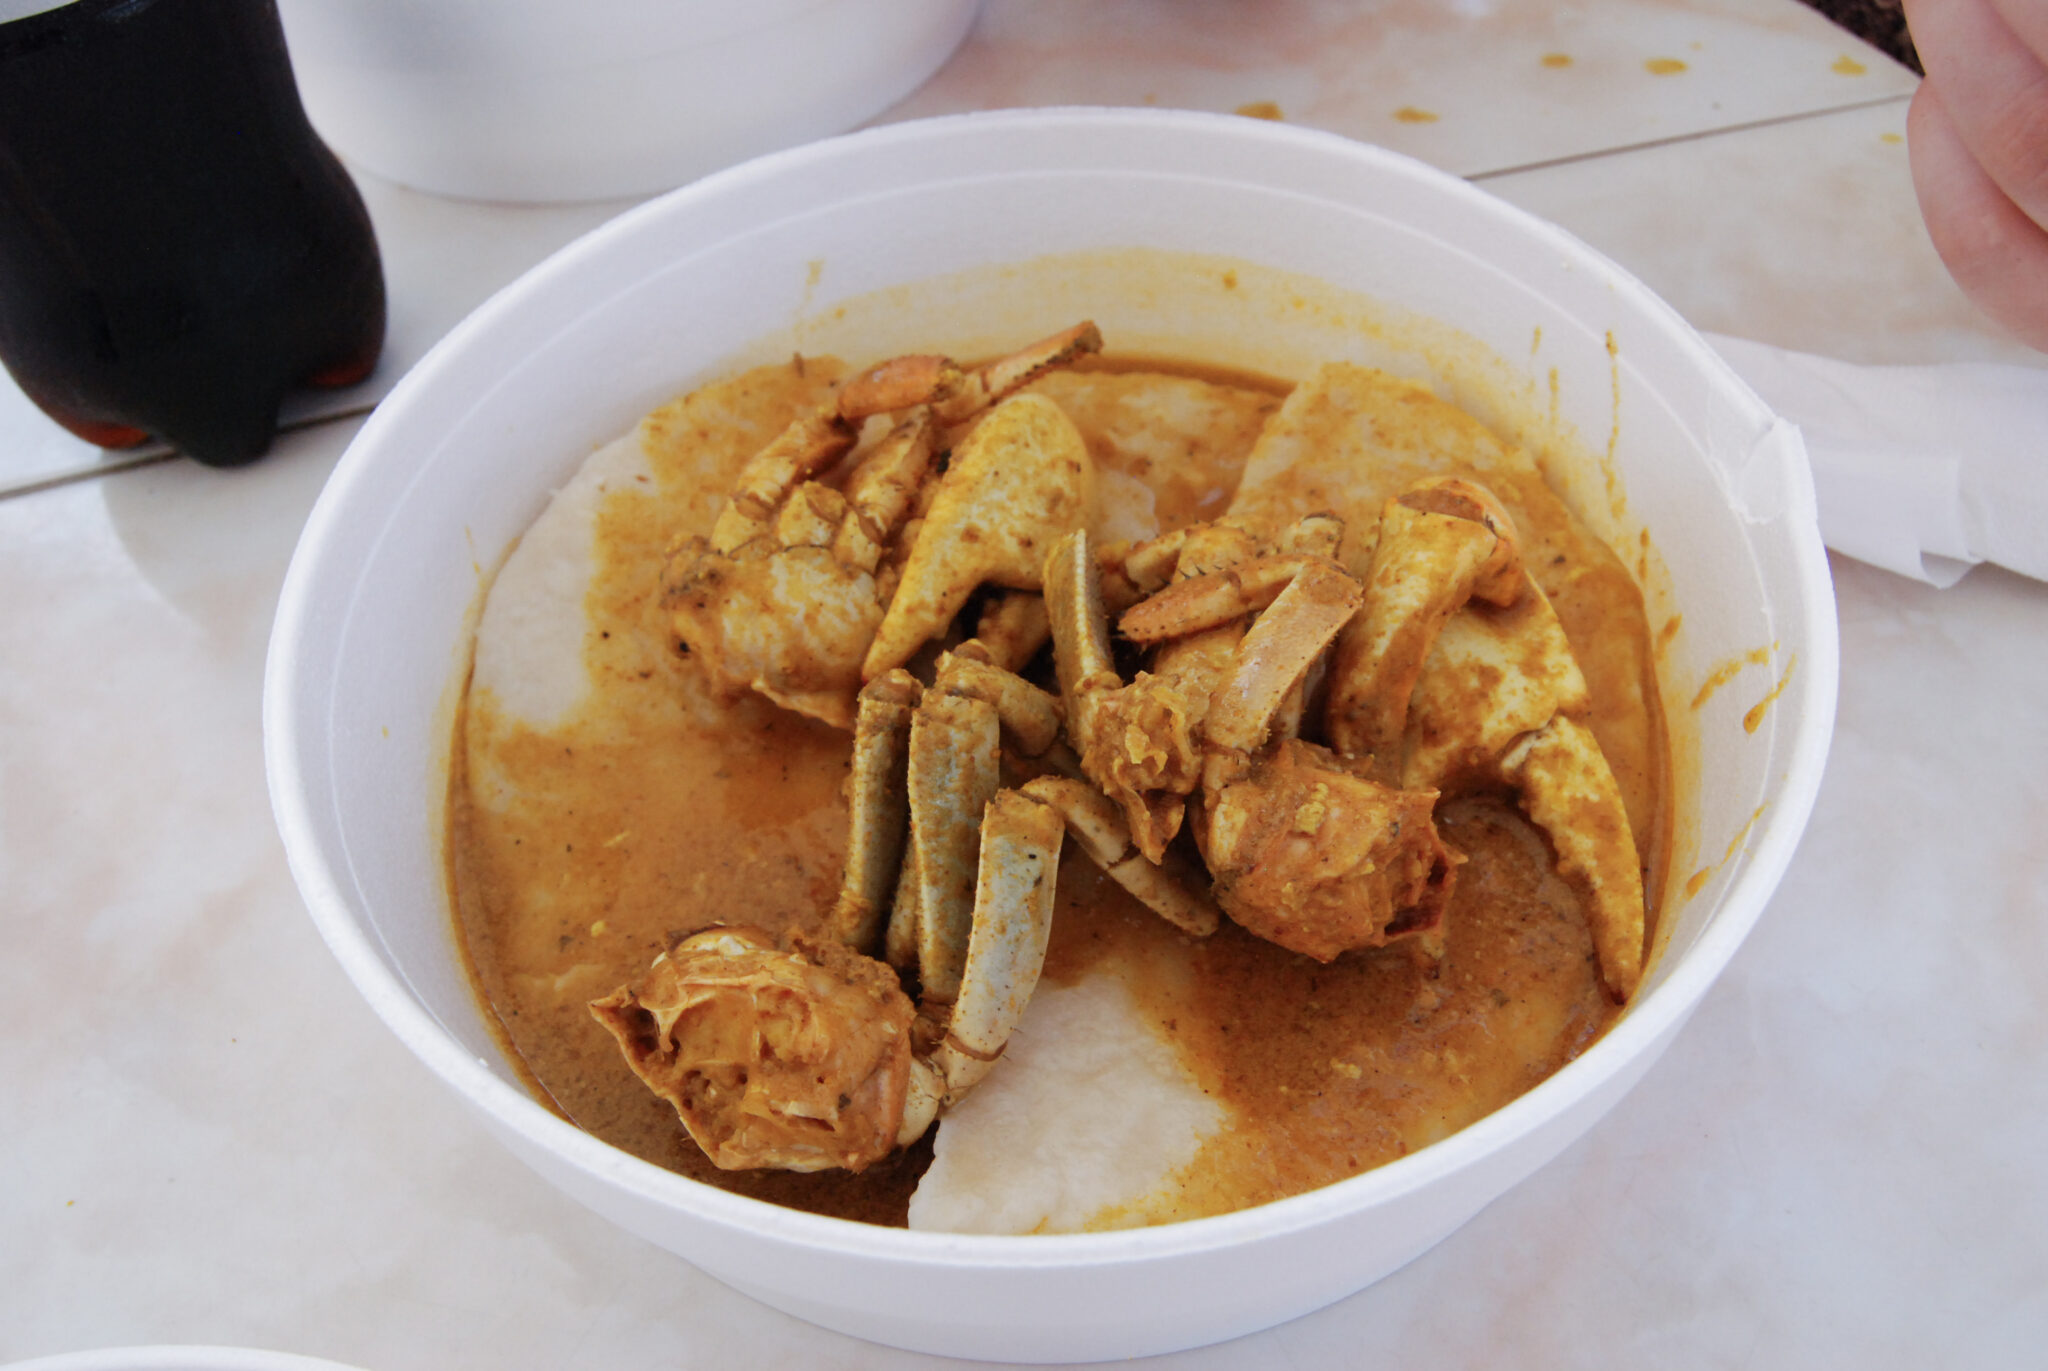 Eating curry crab and dumplings in Tobago.